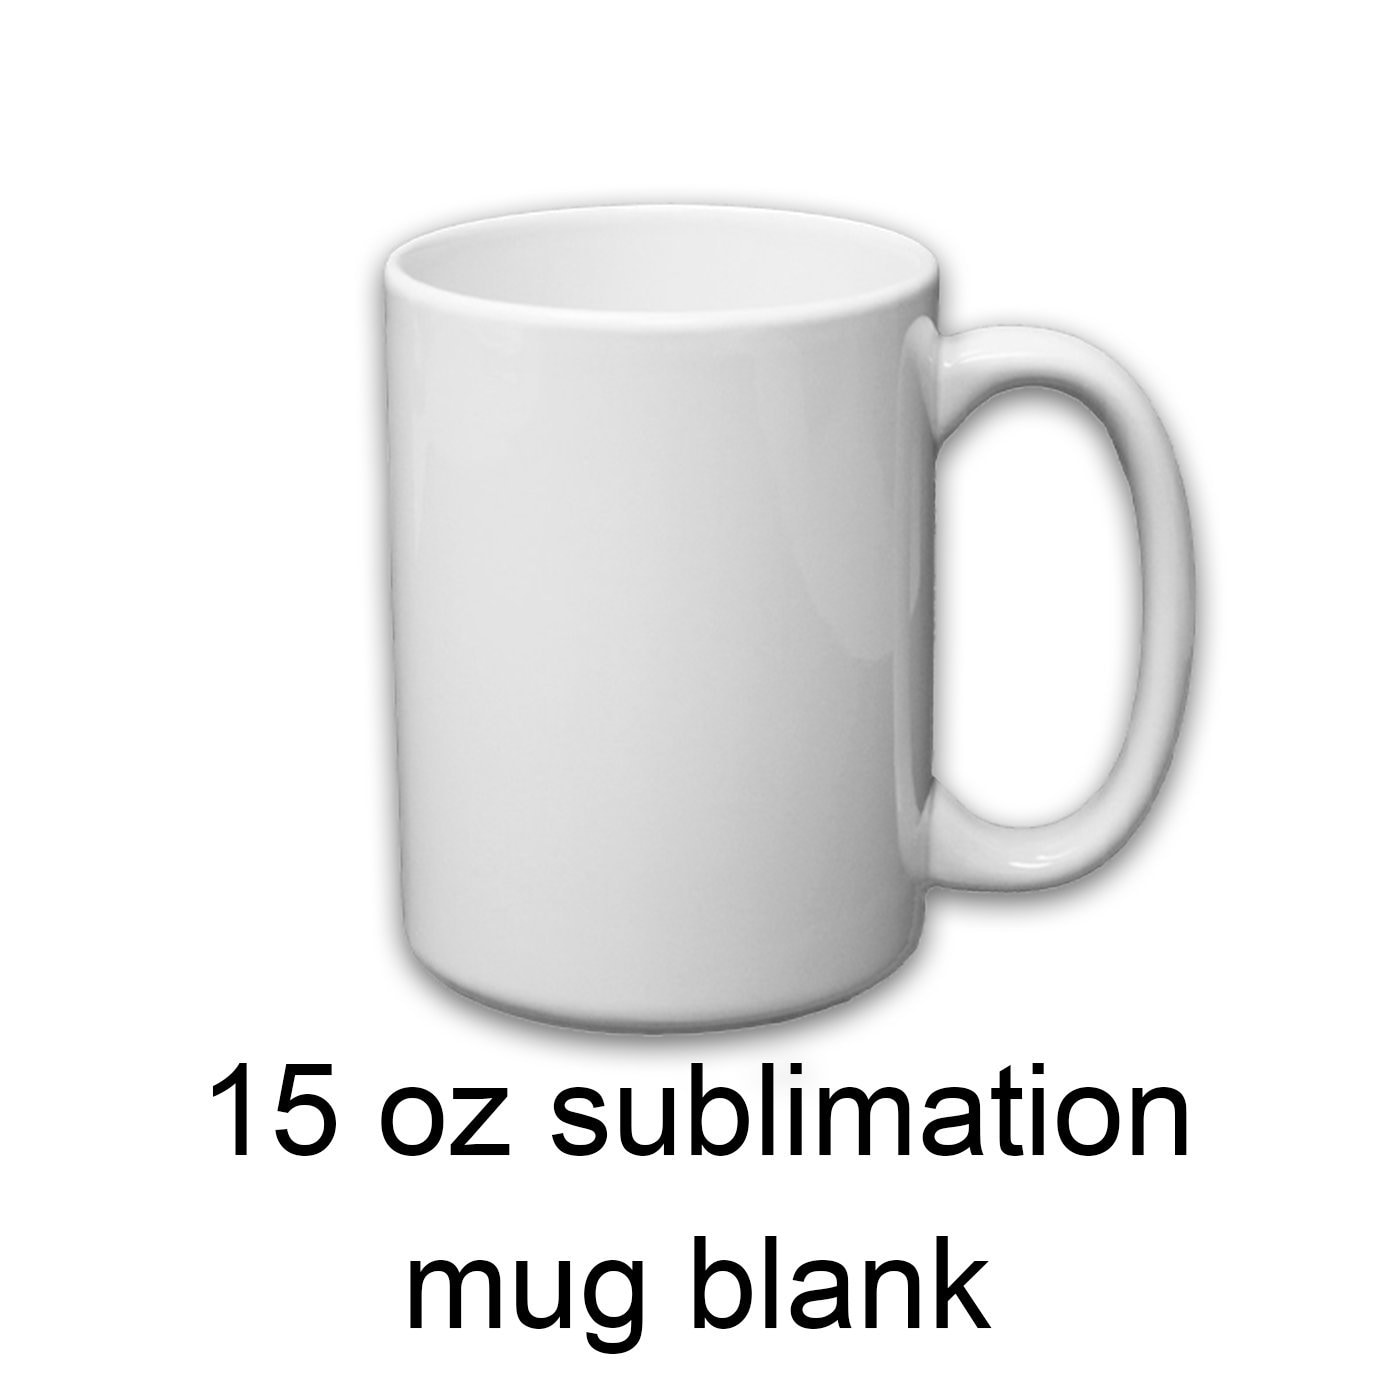 Cricut Bulk Mug Blanks with Infusible Ink Transfer Sheets Bundle - Sublimation Transfer Paper for DIY Custom Coffee Mugs and Cups, Heat Press